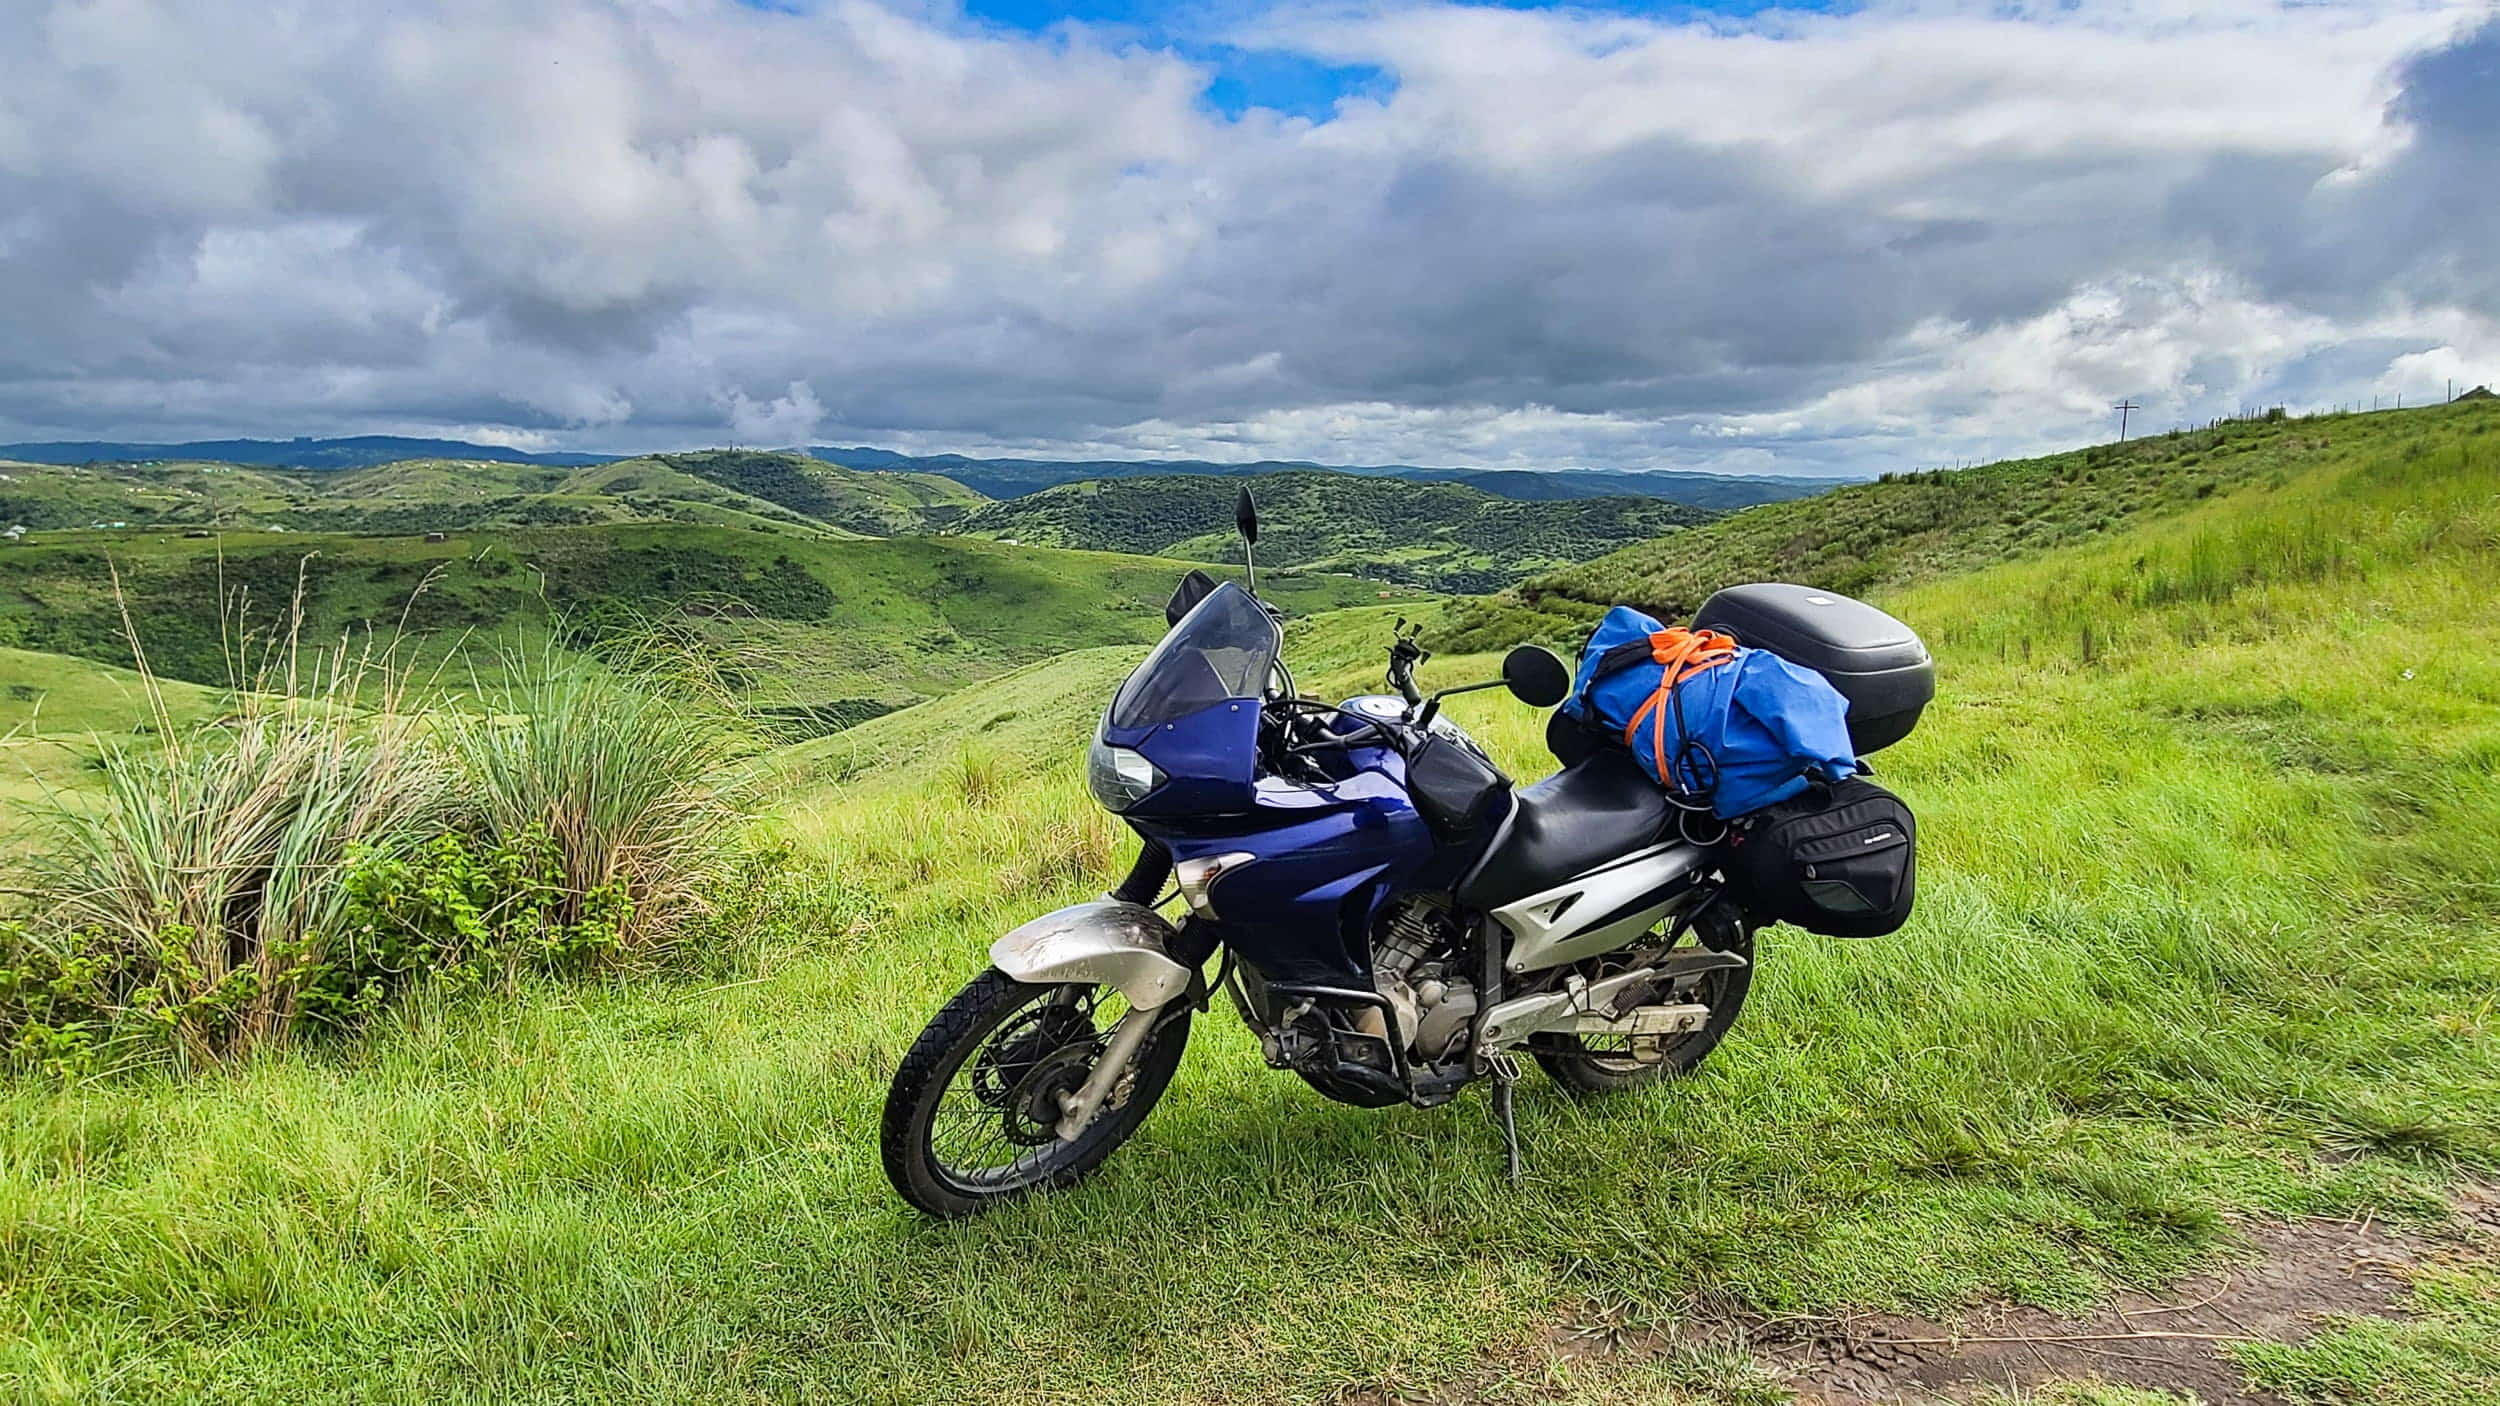 motorcycle parked on a road with green rolling hills behind